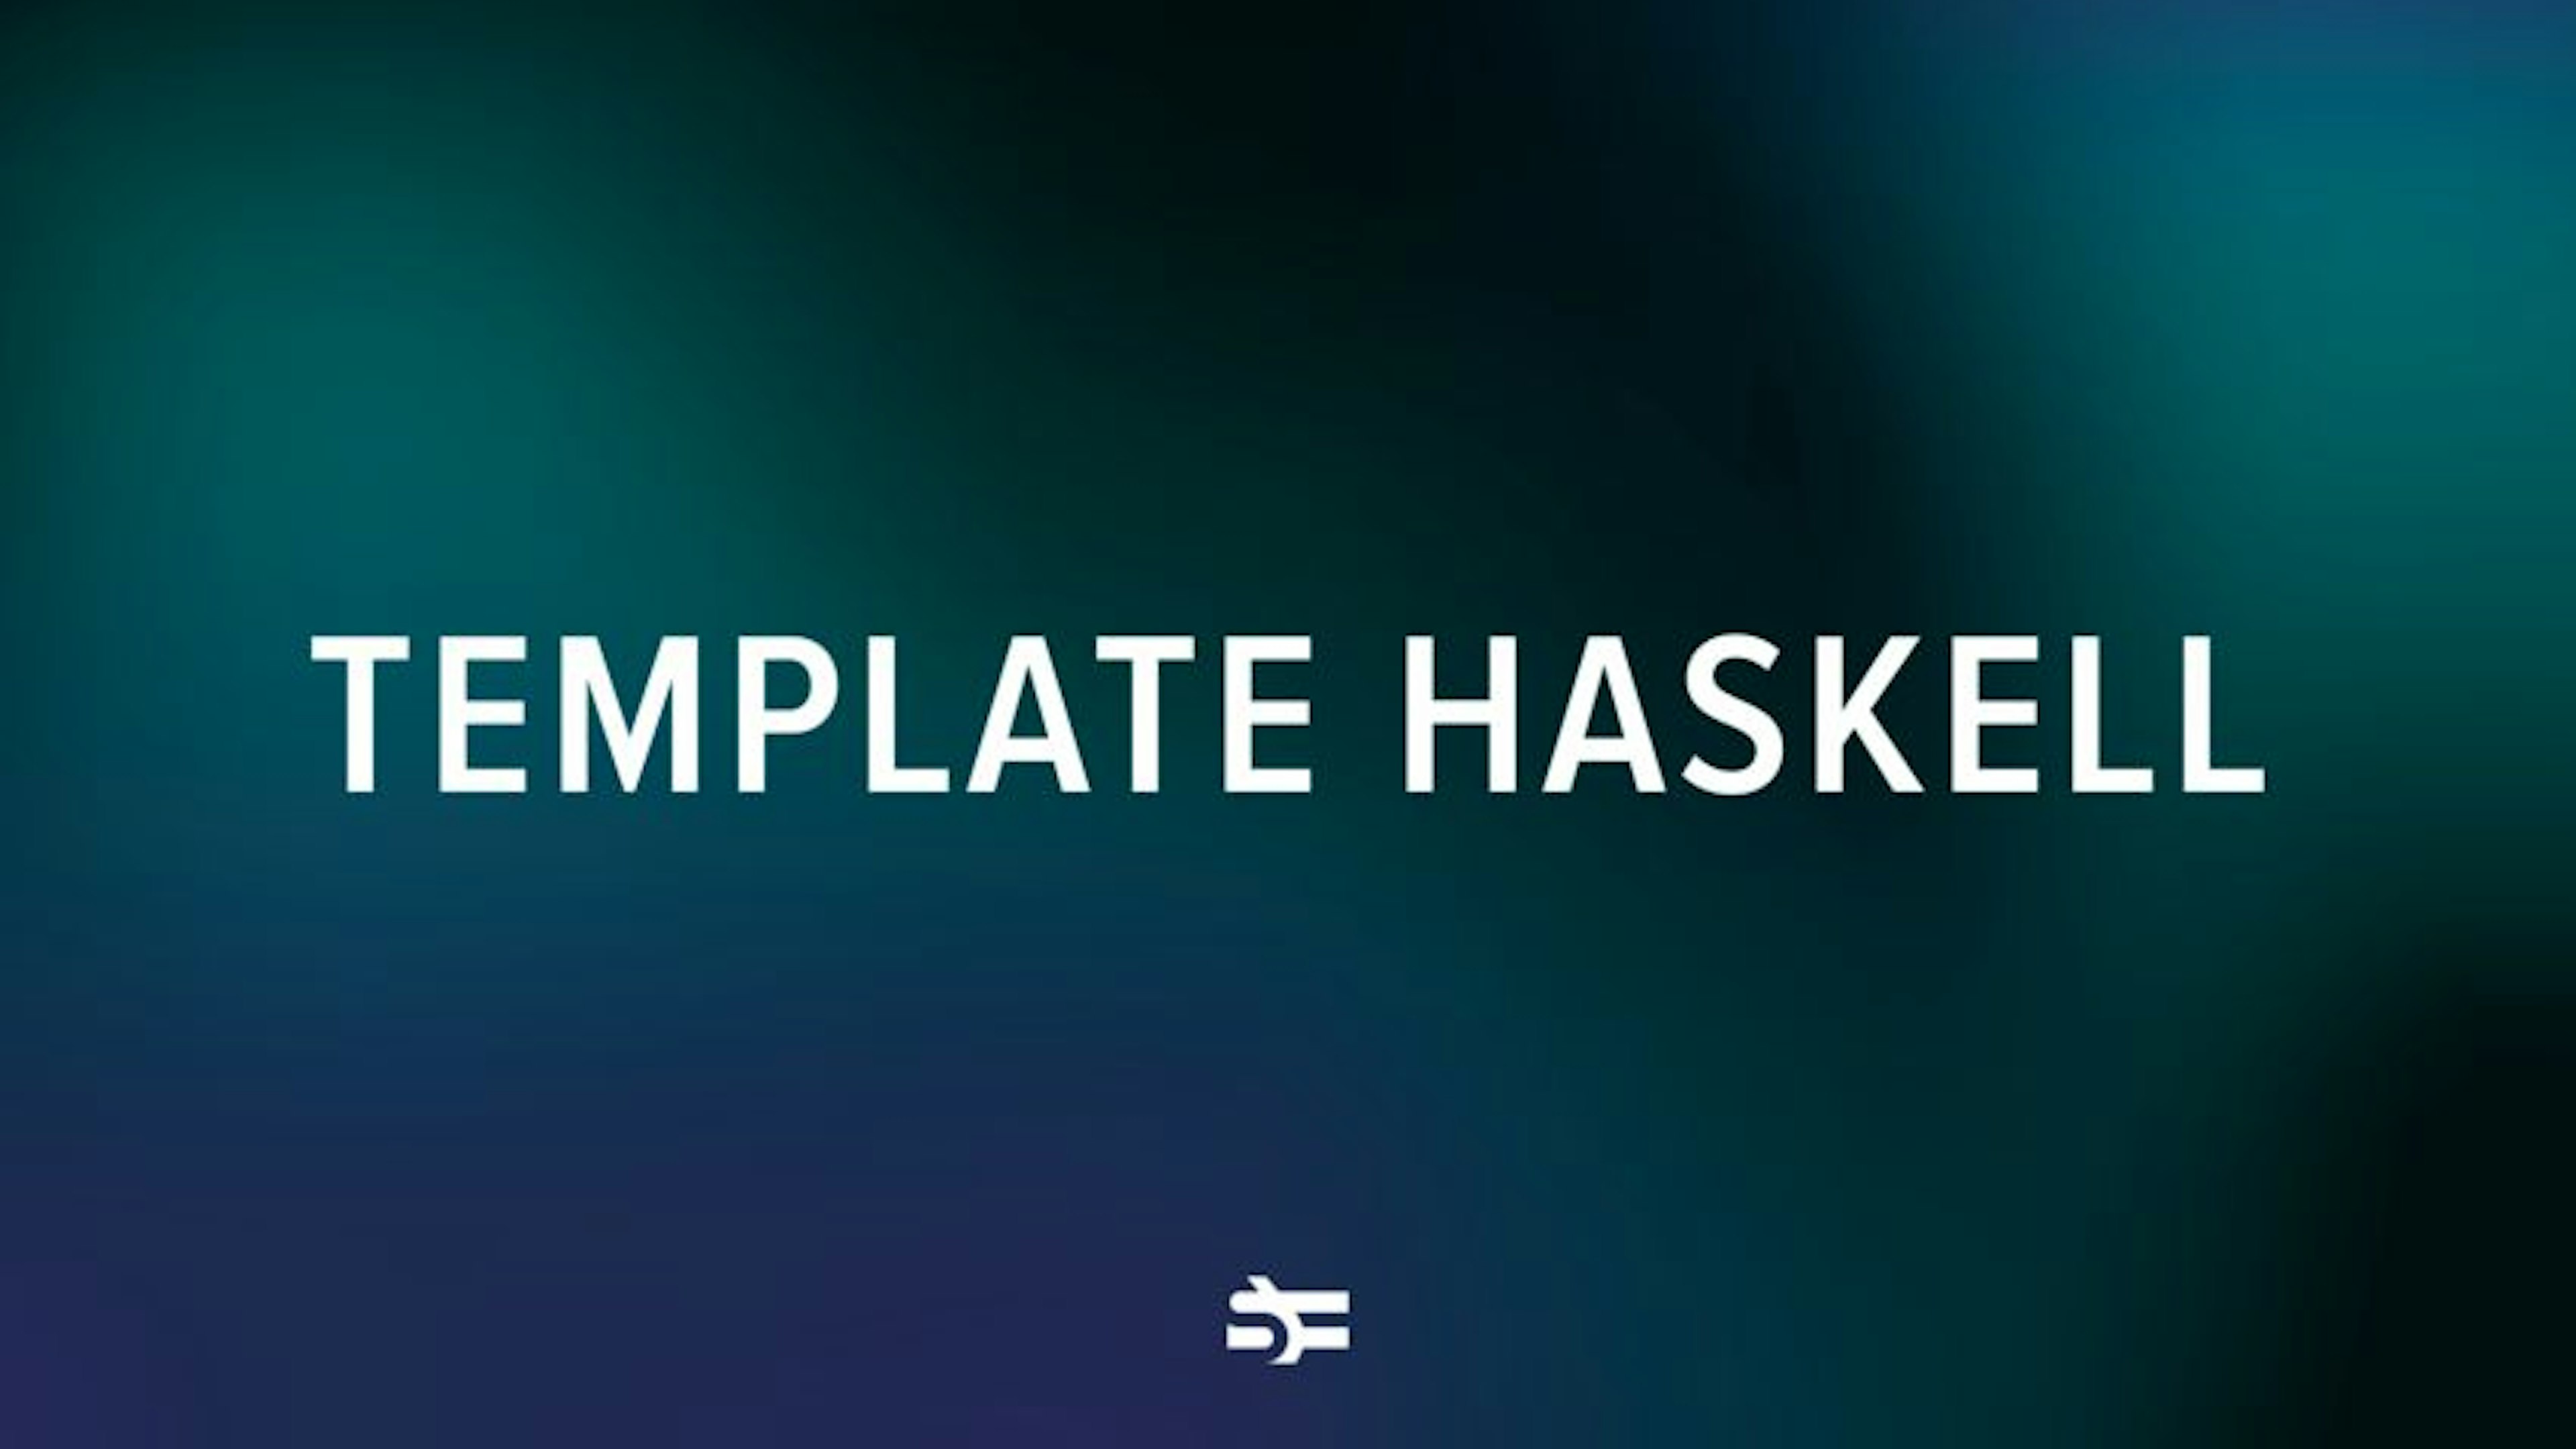 A Brief Introduction to Template Haskell